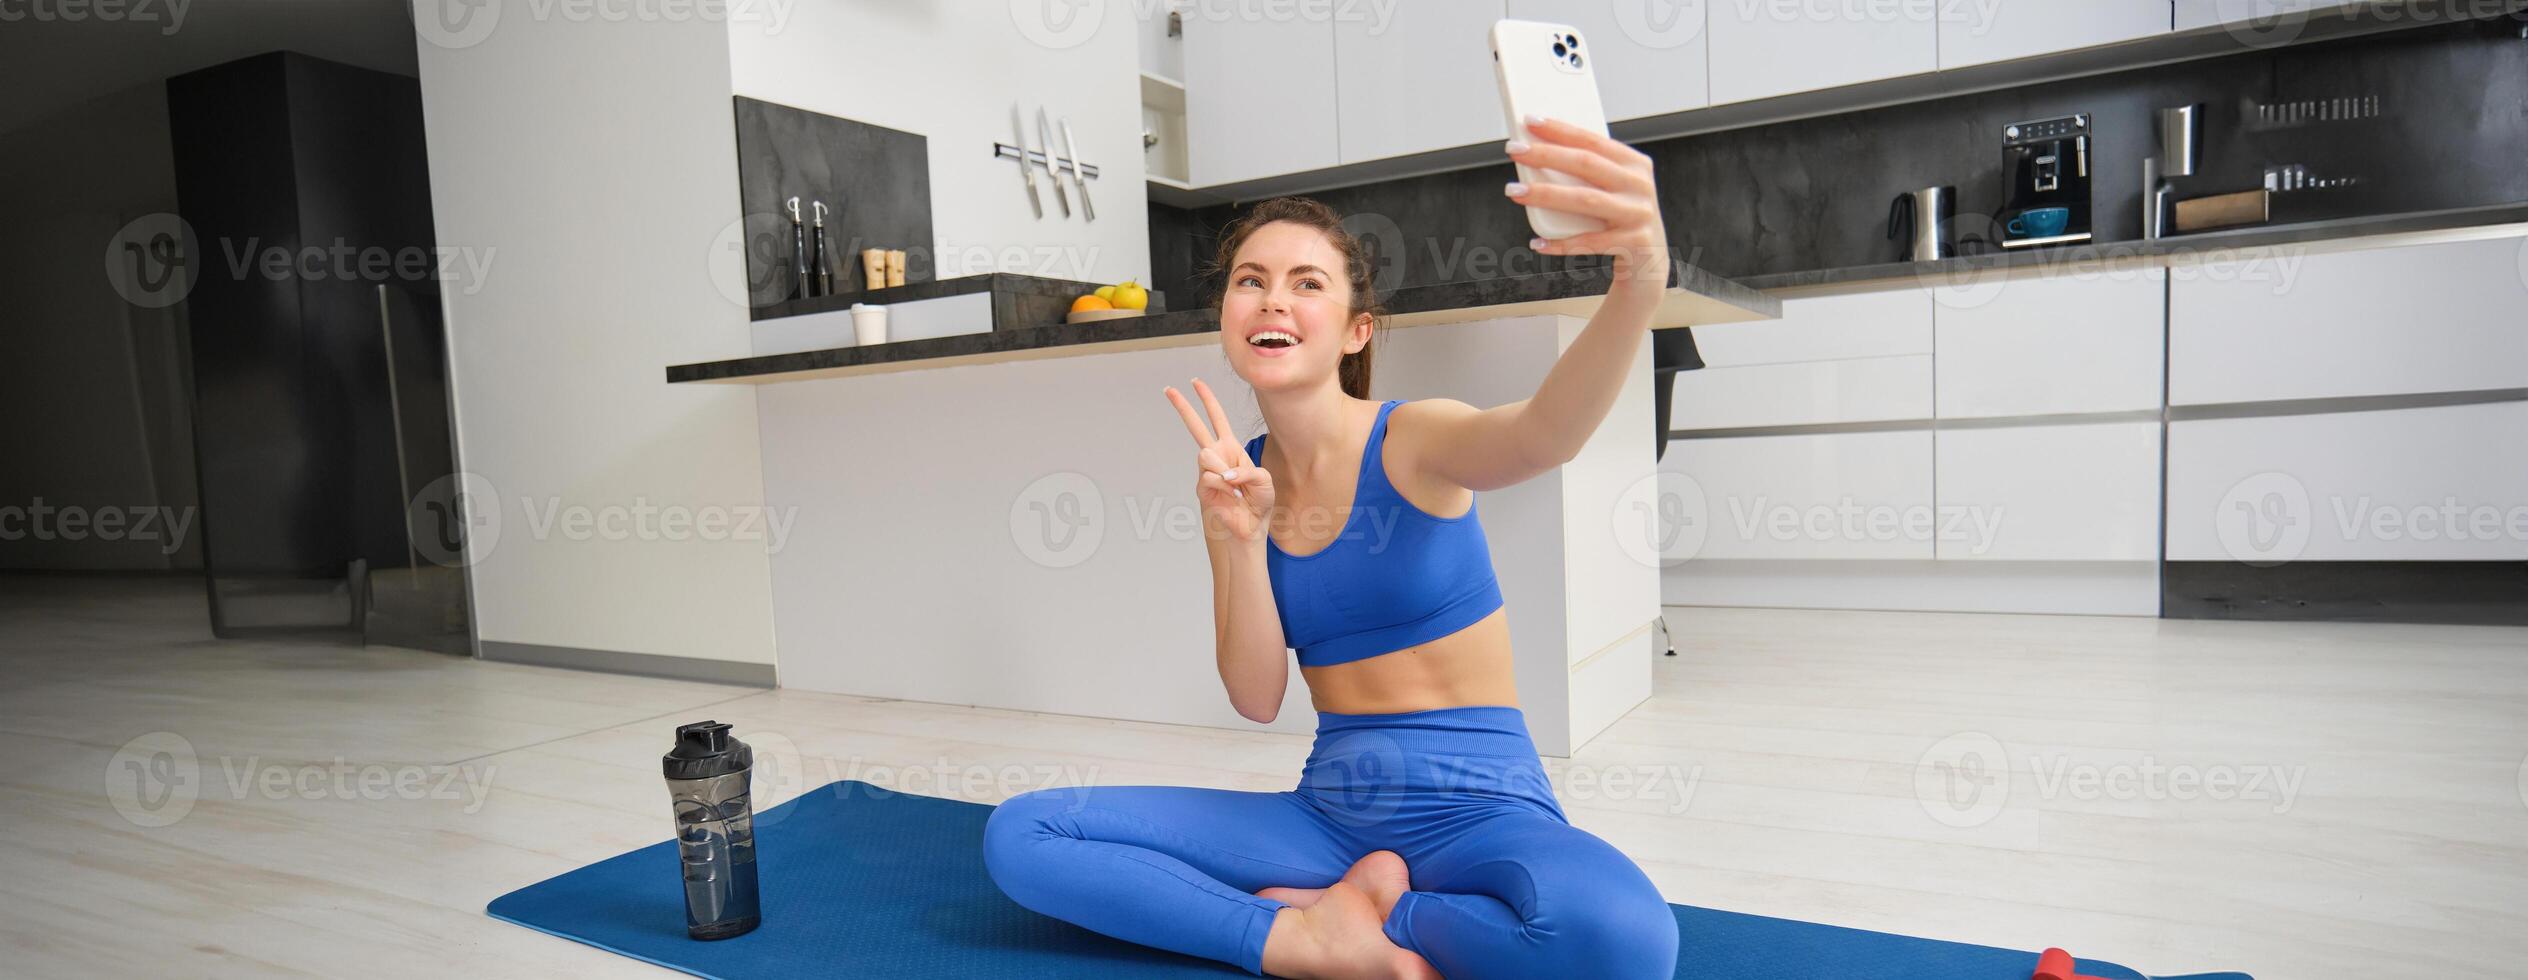 Active young woman, vlogger does sports, records her workout training from home on smartphone camera, posing for selfie inside her house, sits on rubber yoga mat in blue leggings and sportsbra photo